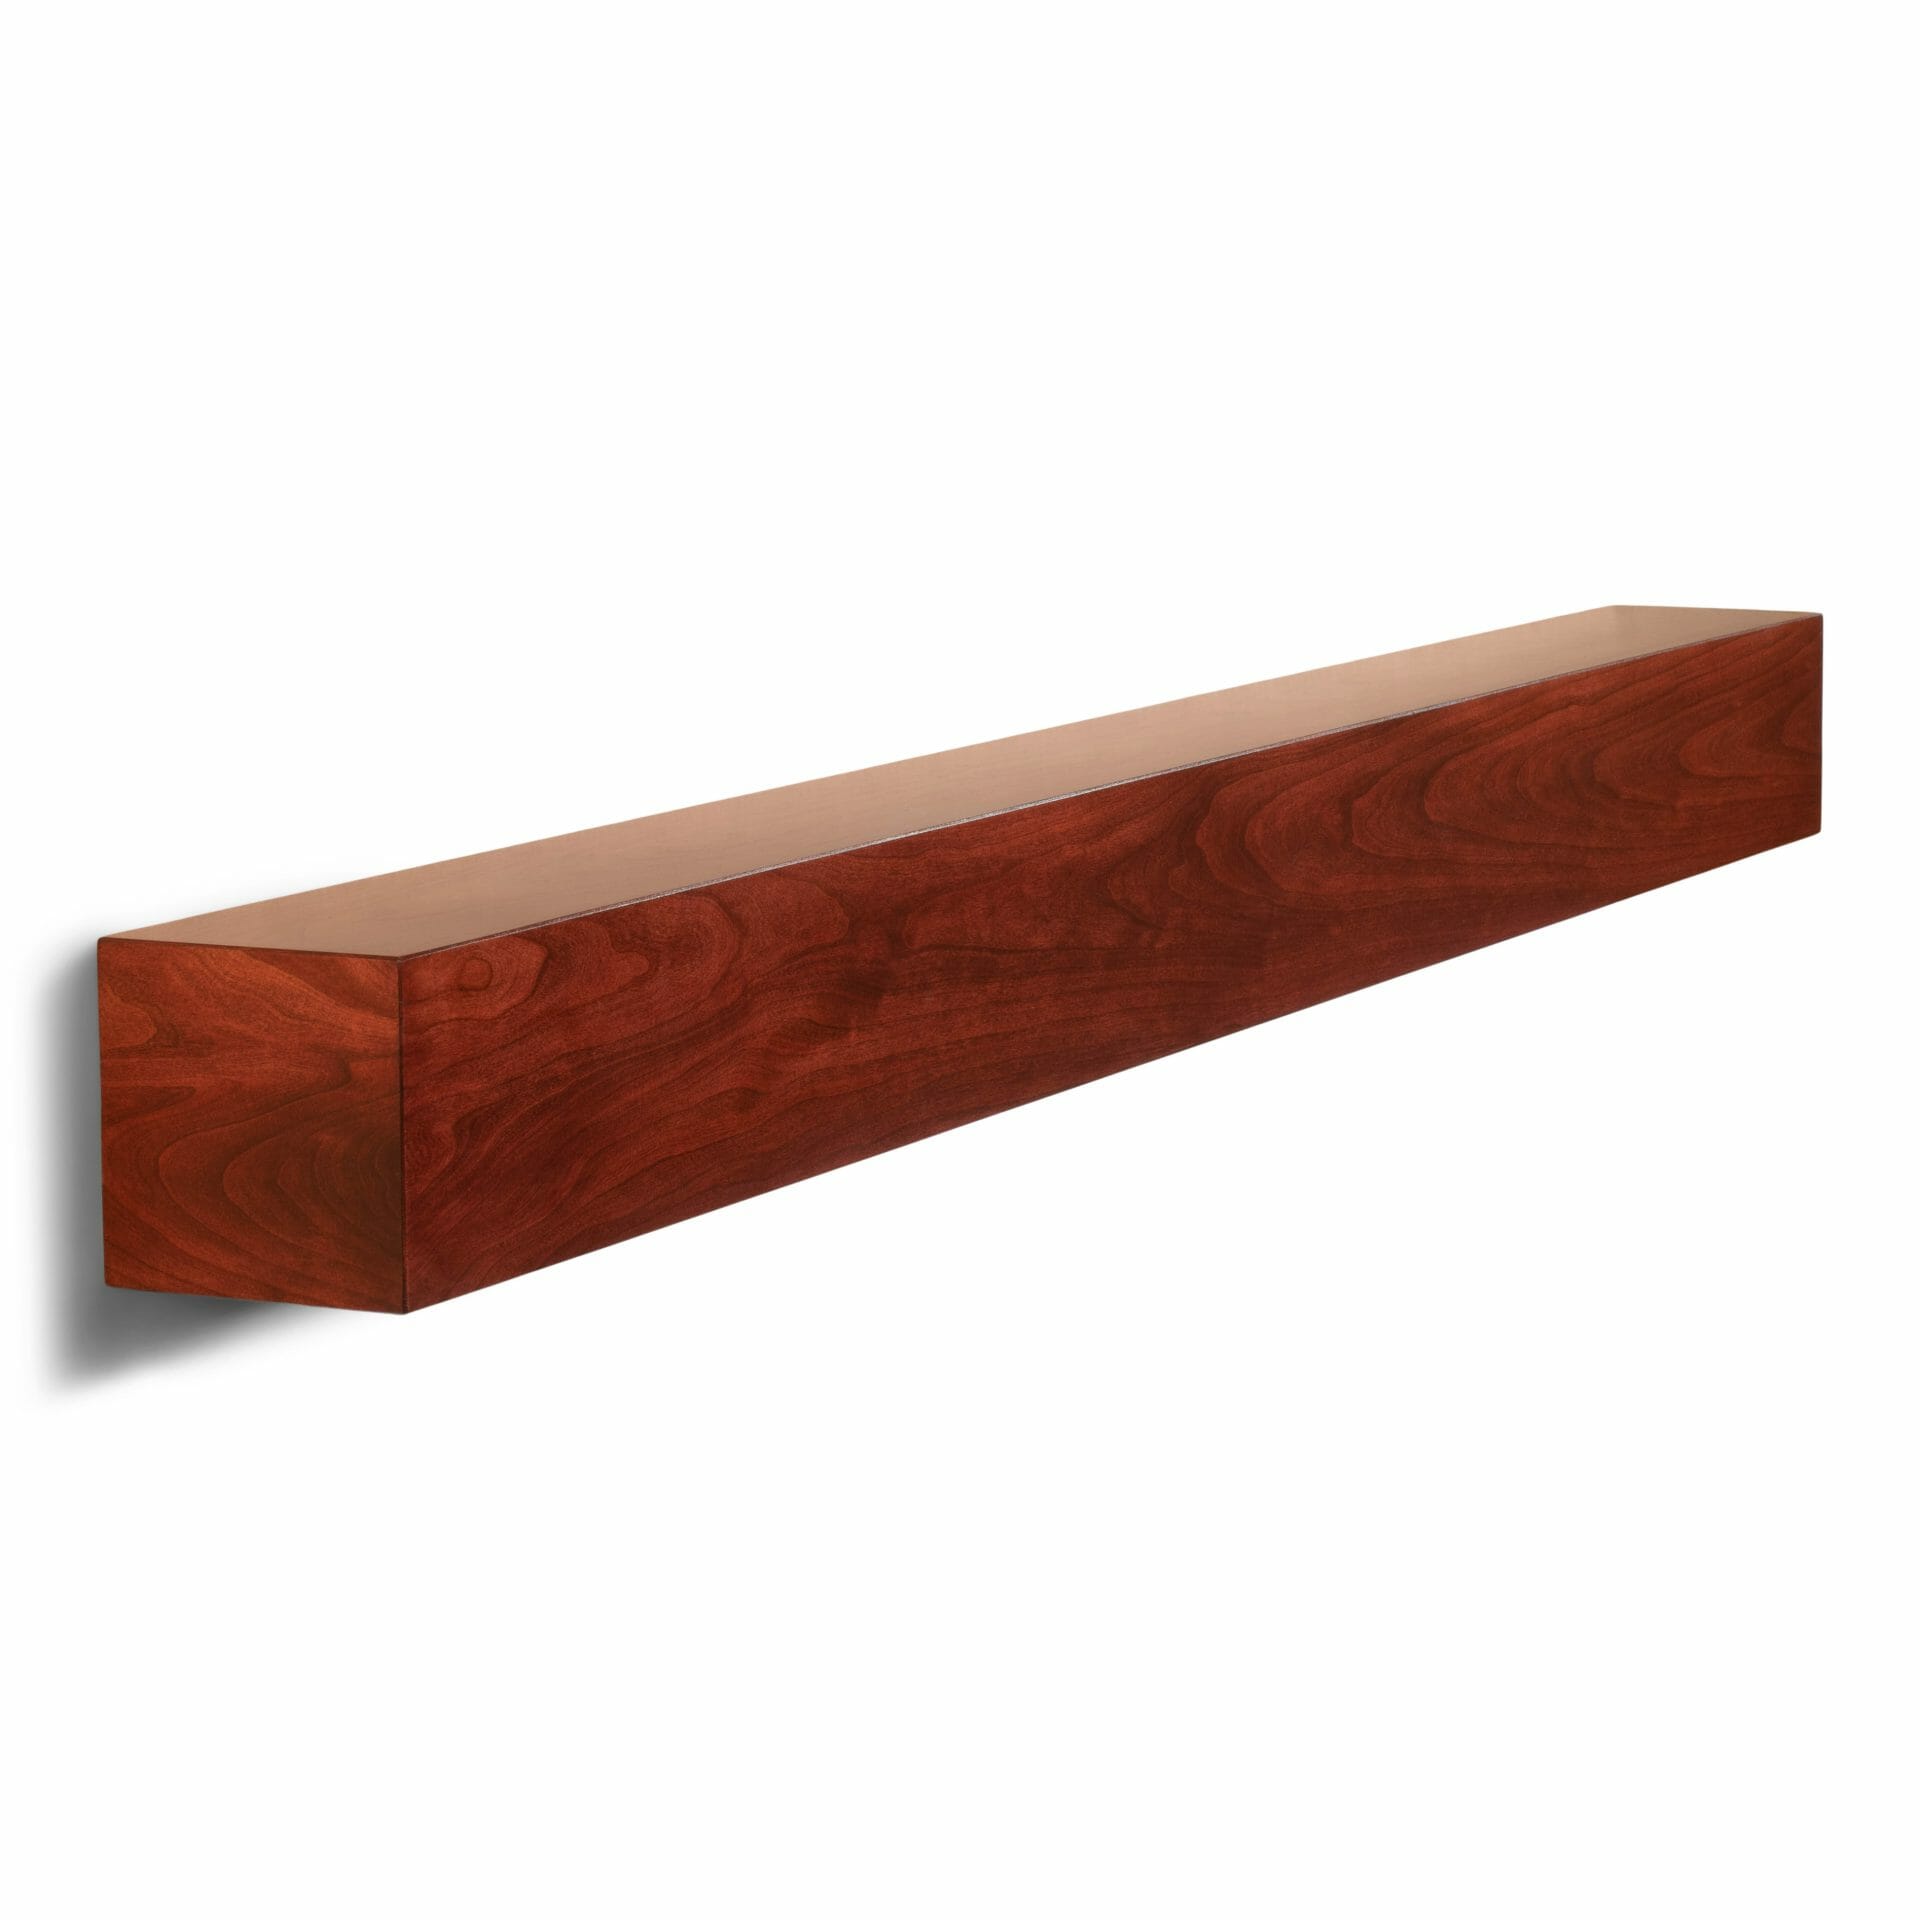 cherry wood mantel in chianti red color